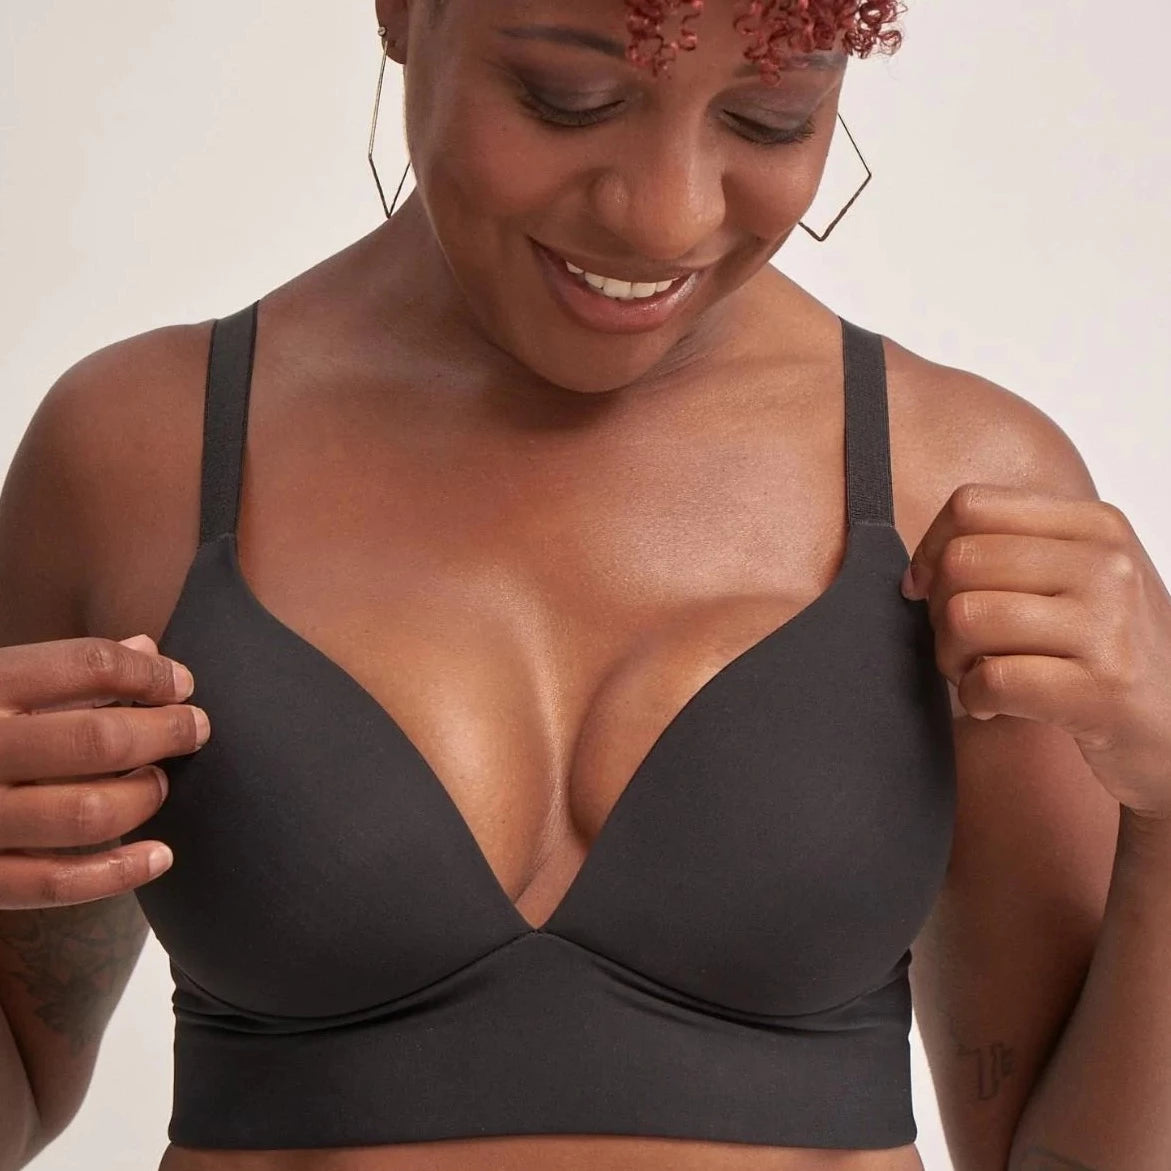 Trish Moulded Cup Bra by AnaOno | Black | Underwear for women touched by breast cancer